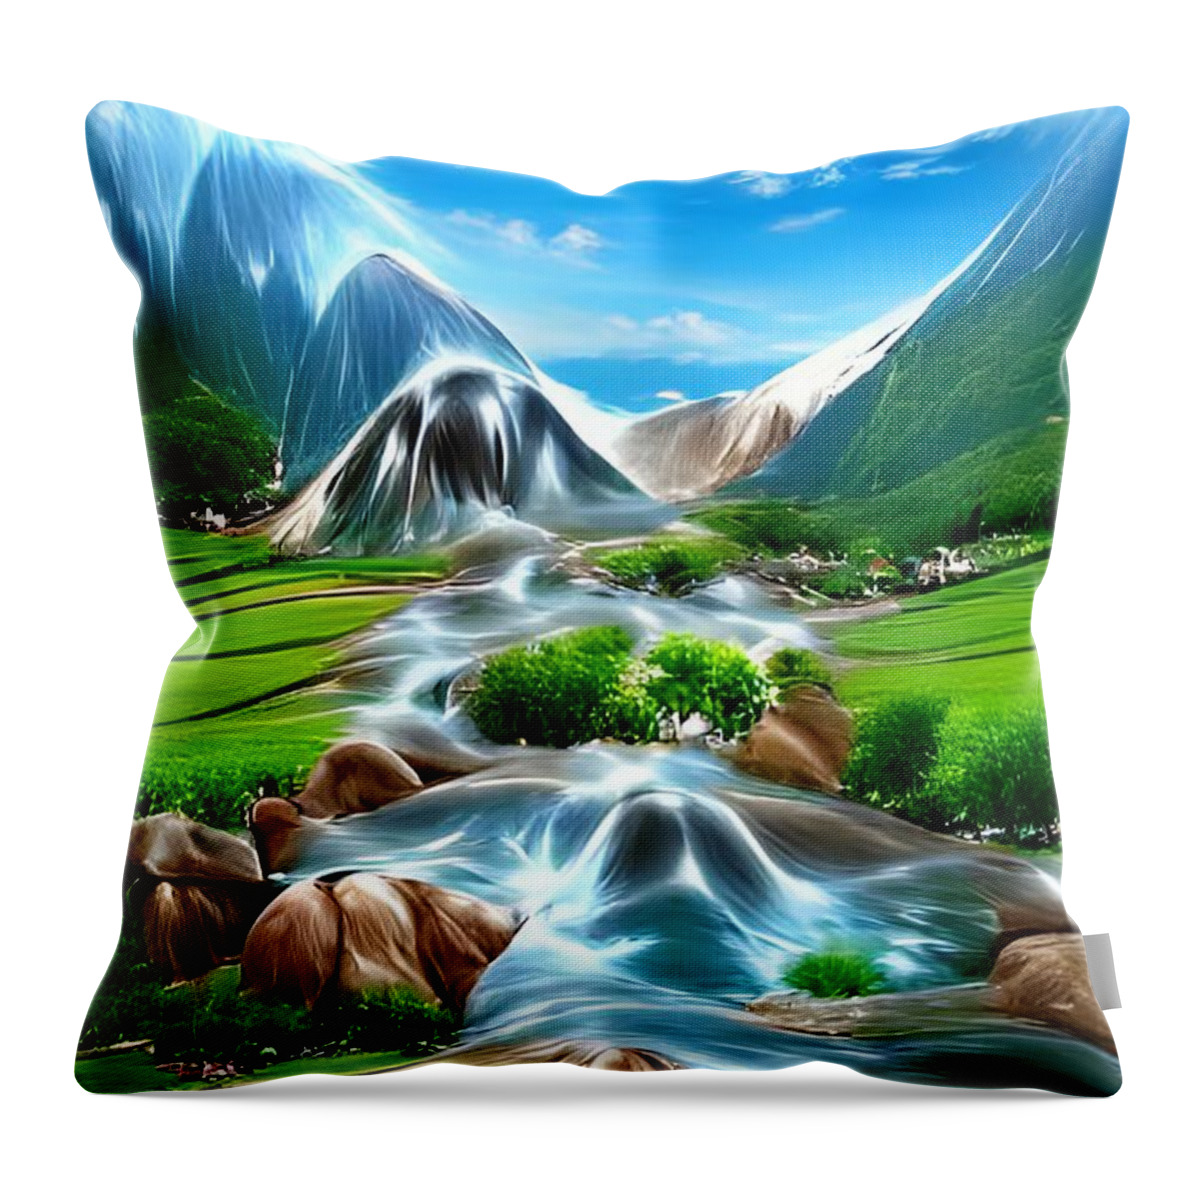 Digital Throw Pillow featuring the digital art Peaceful Valley by Beverly Read